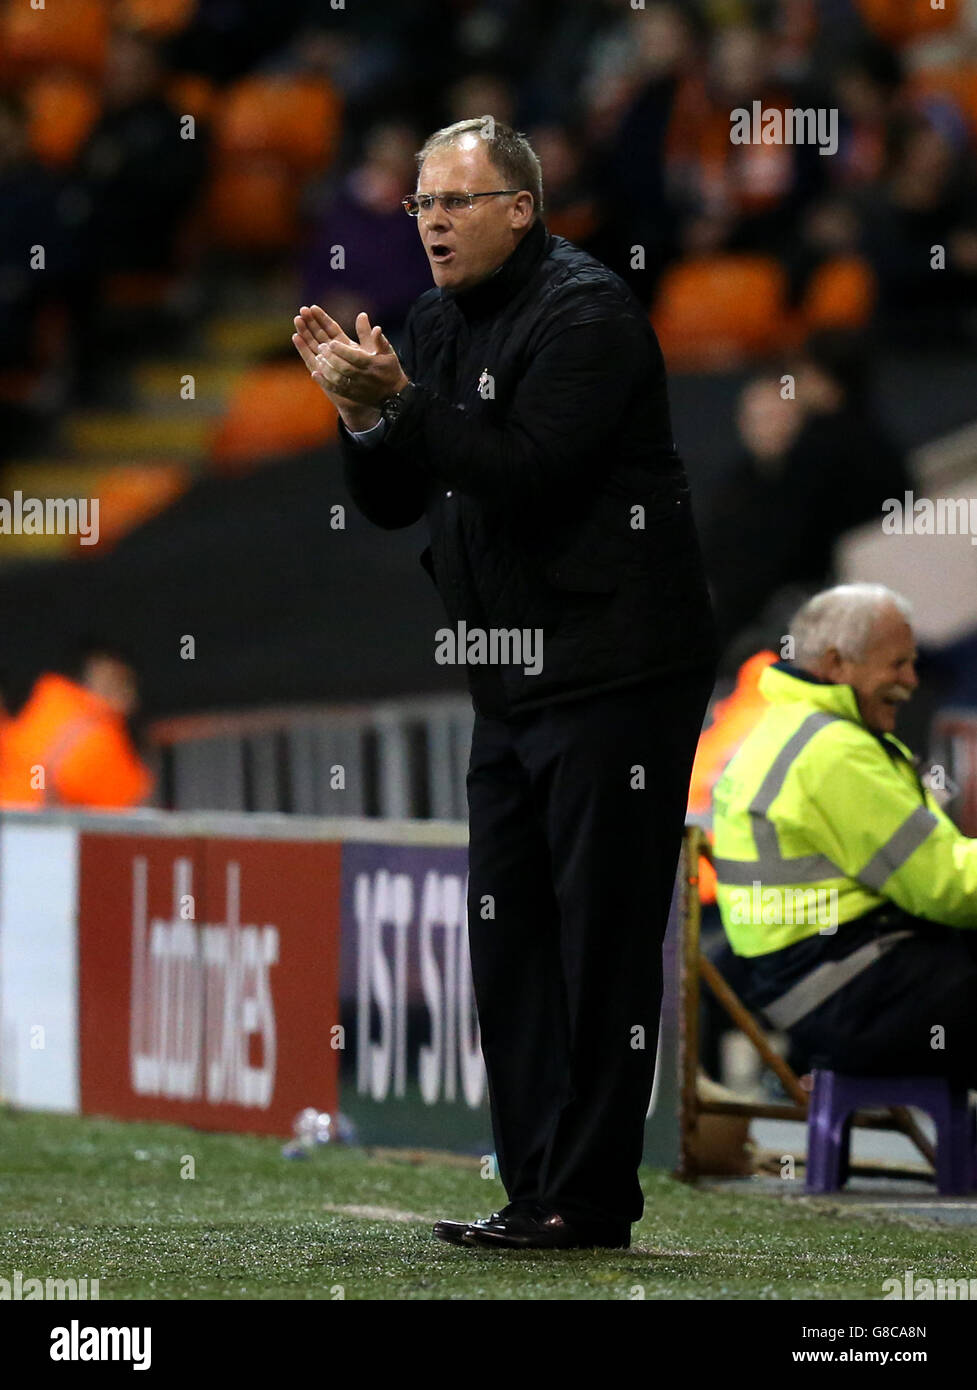 Soccer - Sky Bet League One - Blackpool v Millwall - Bloomfield Road. Blackpool manager Neil McDonald gestures on the touchline Stock Photo